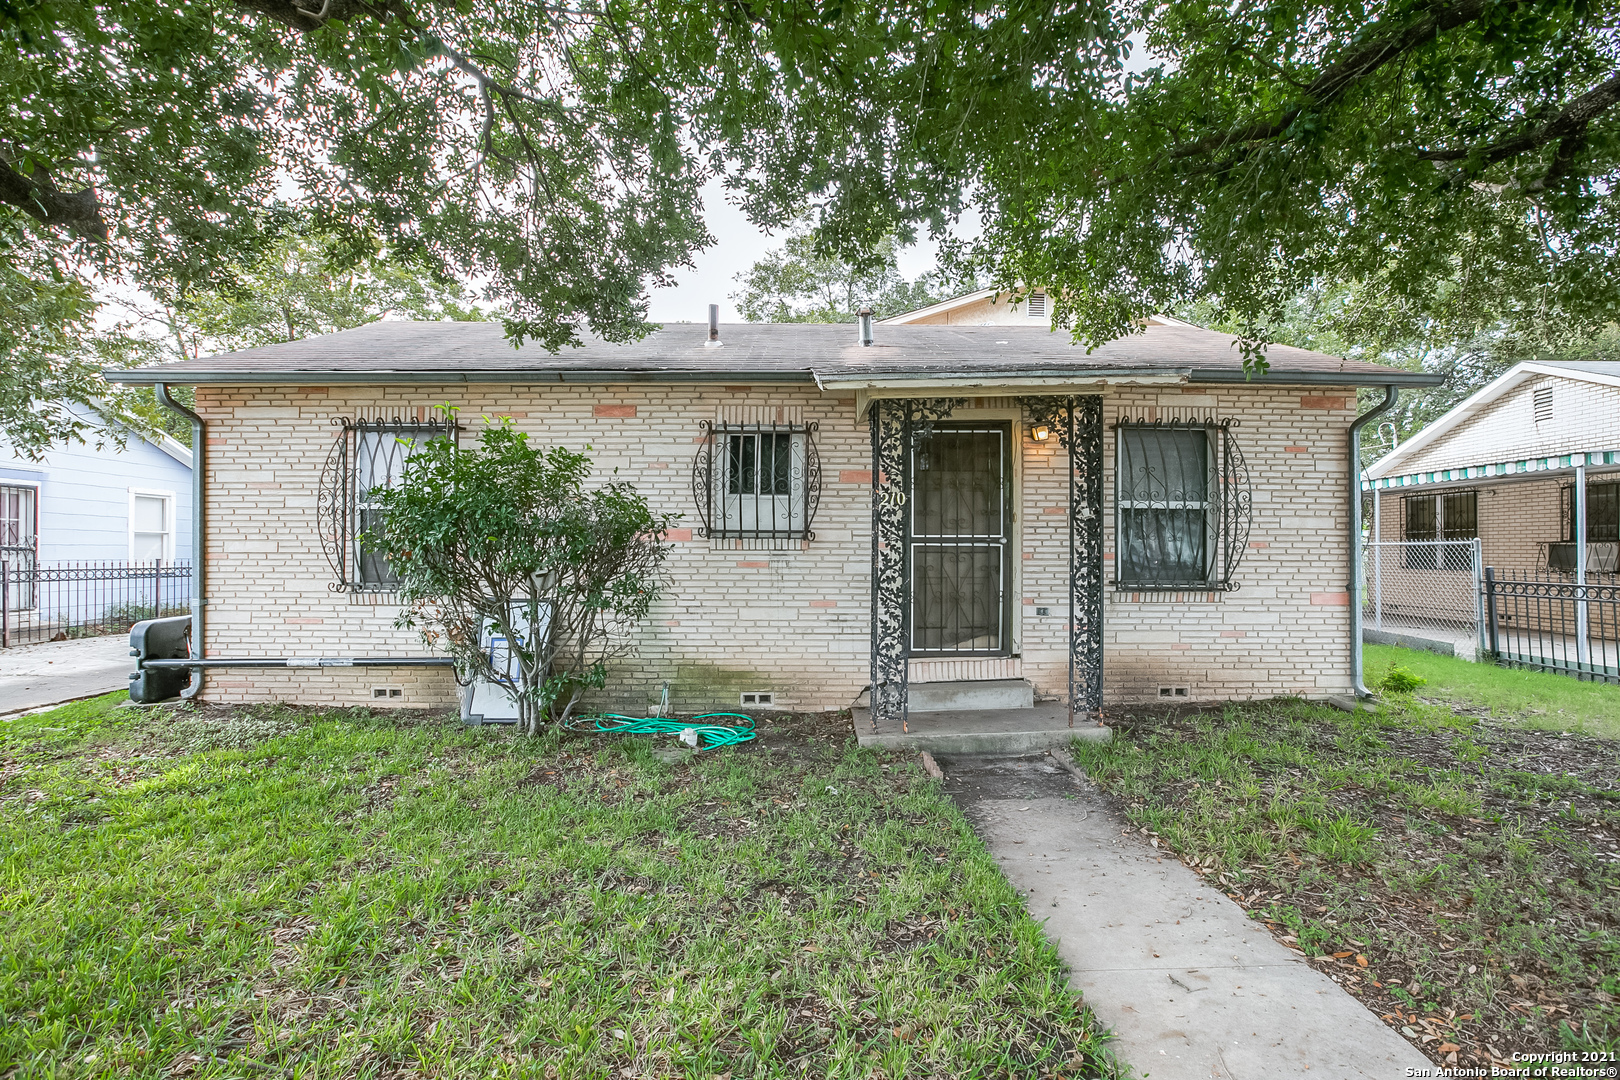 Property located in established neighborhood, 3 bedroom, 2 bathroom, large backyard great for entertaining. AS-IS, WHERE-IS, BUYER TO PURCHASE SURVEY NO EXCEPTIONS.